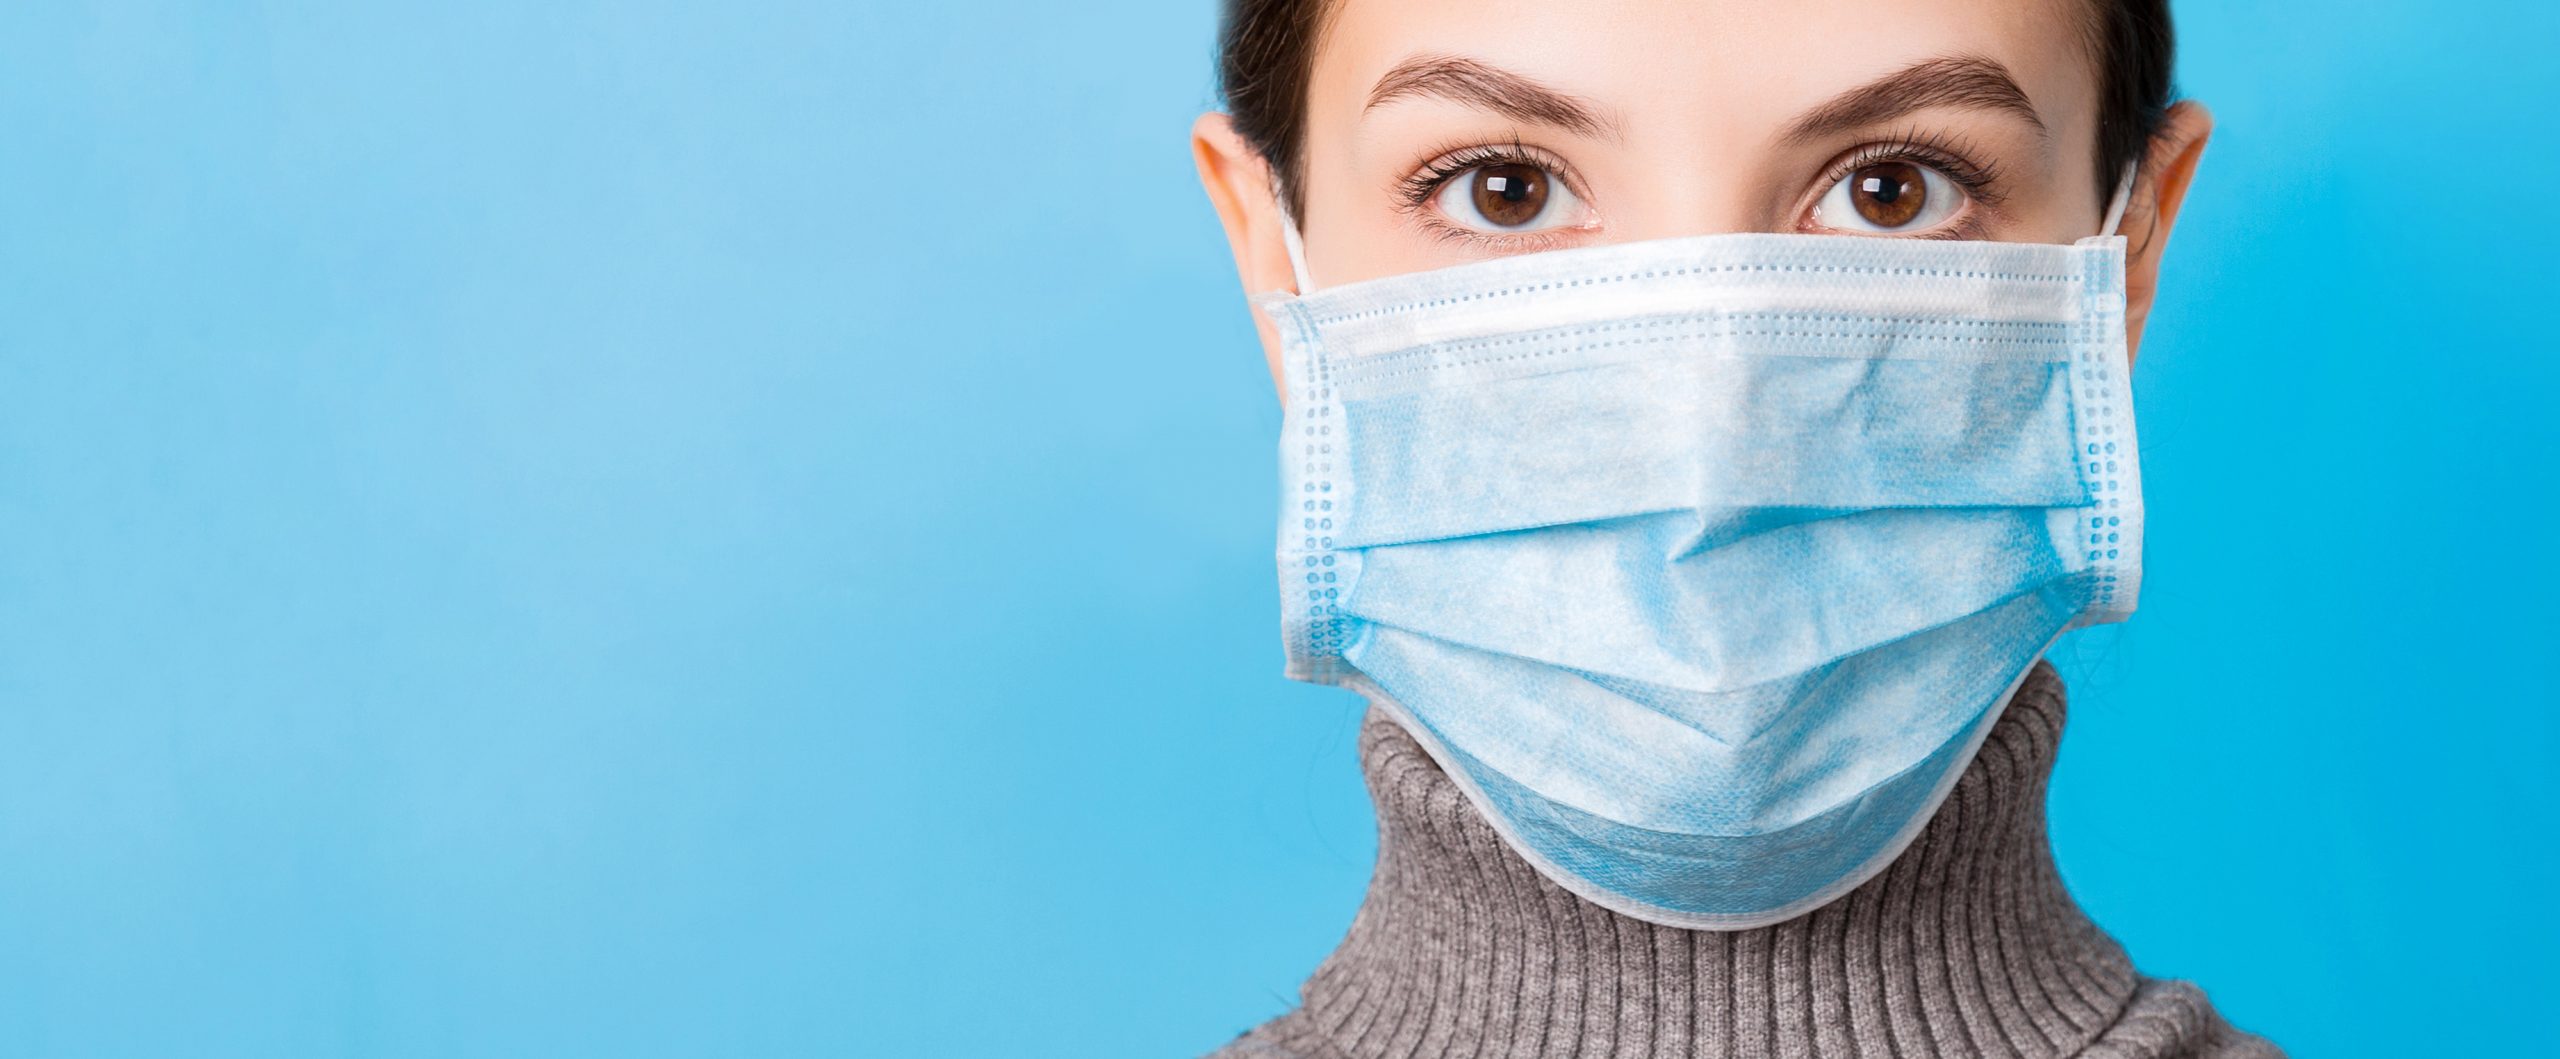 Portrait of young woman wearing medical mask at blue background